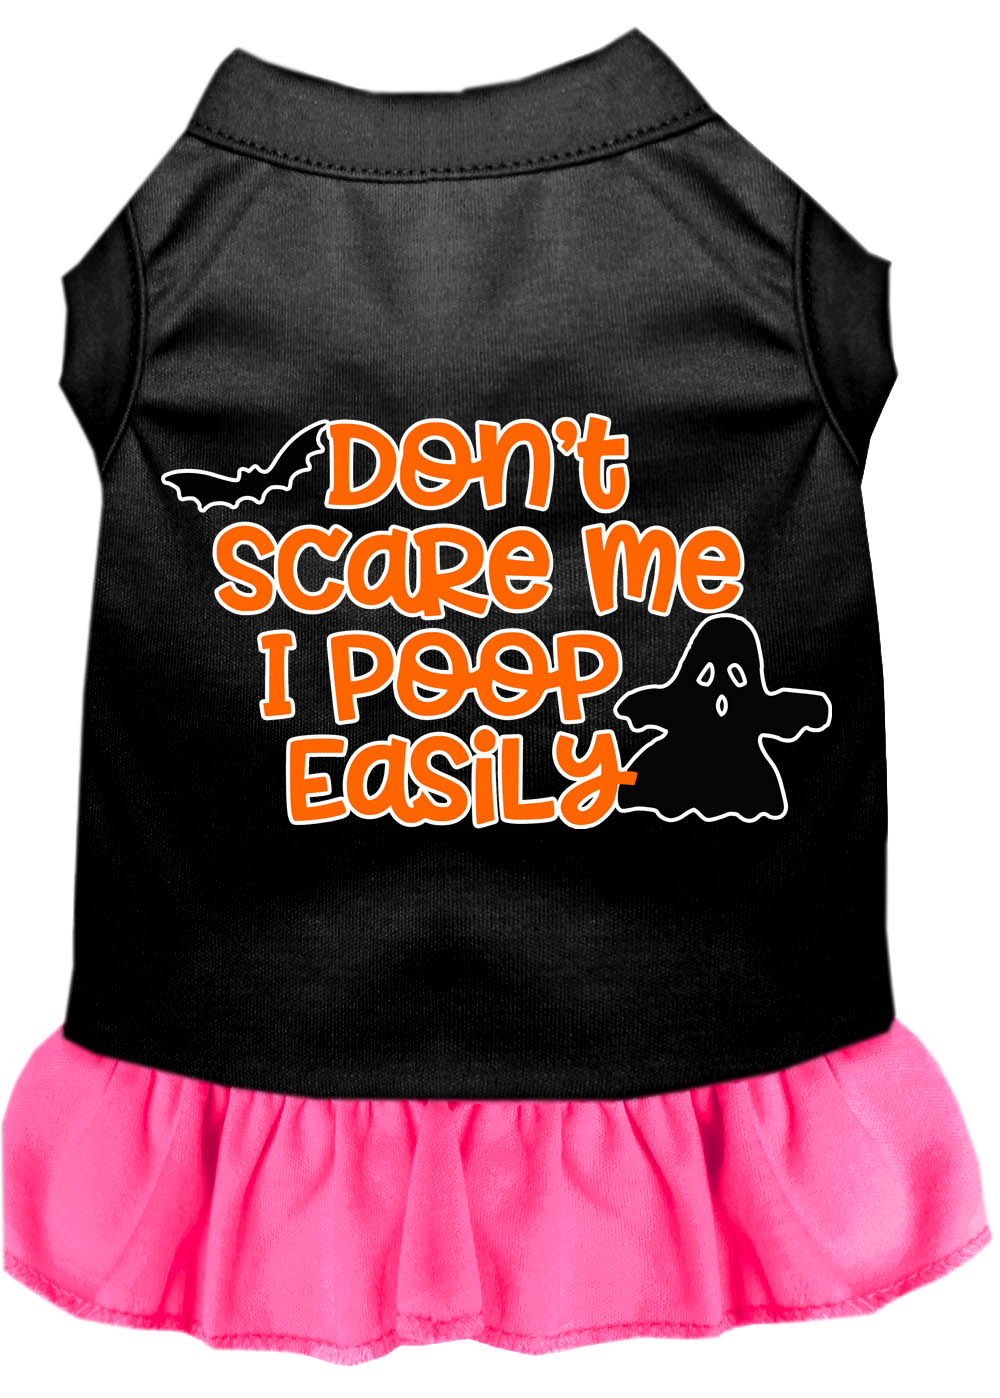 Don't Scare Me, Poops Easily Screen Print Dog Dress Black with Bright Pink XS